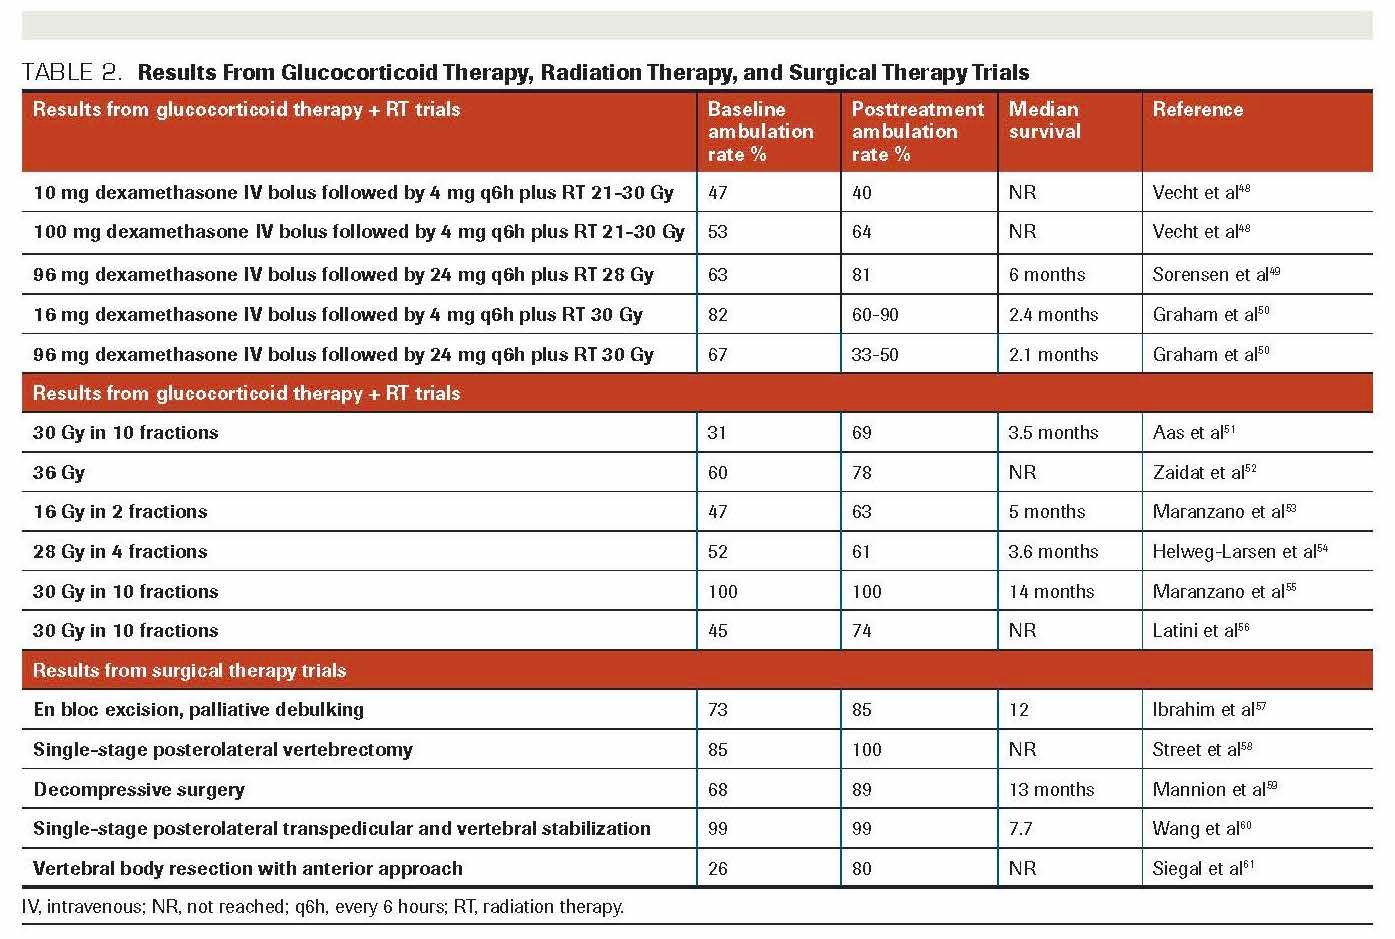 TABLE 2. Results From Glucocorticoid Therapy, Radiation Therapy, and Surgical Therapy Trials